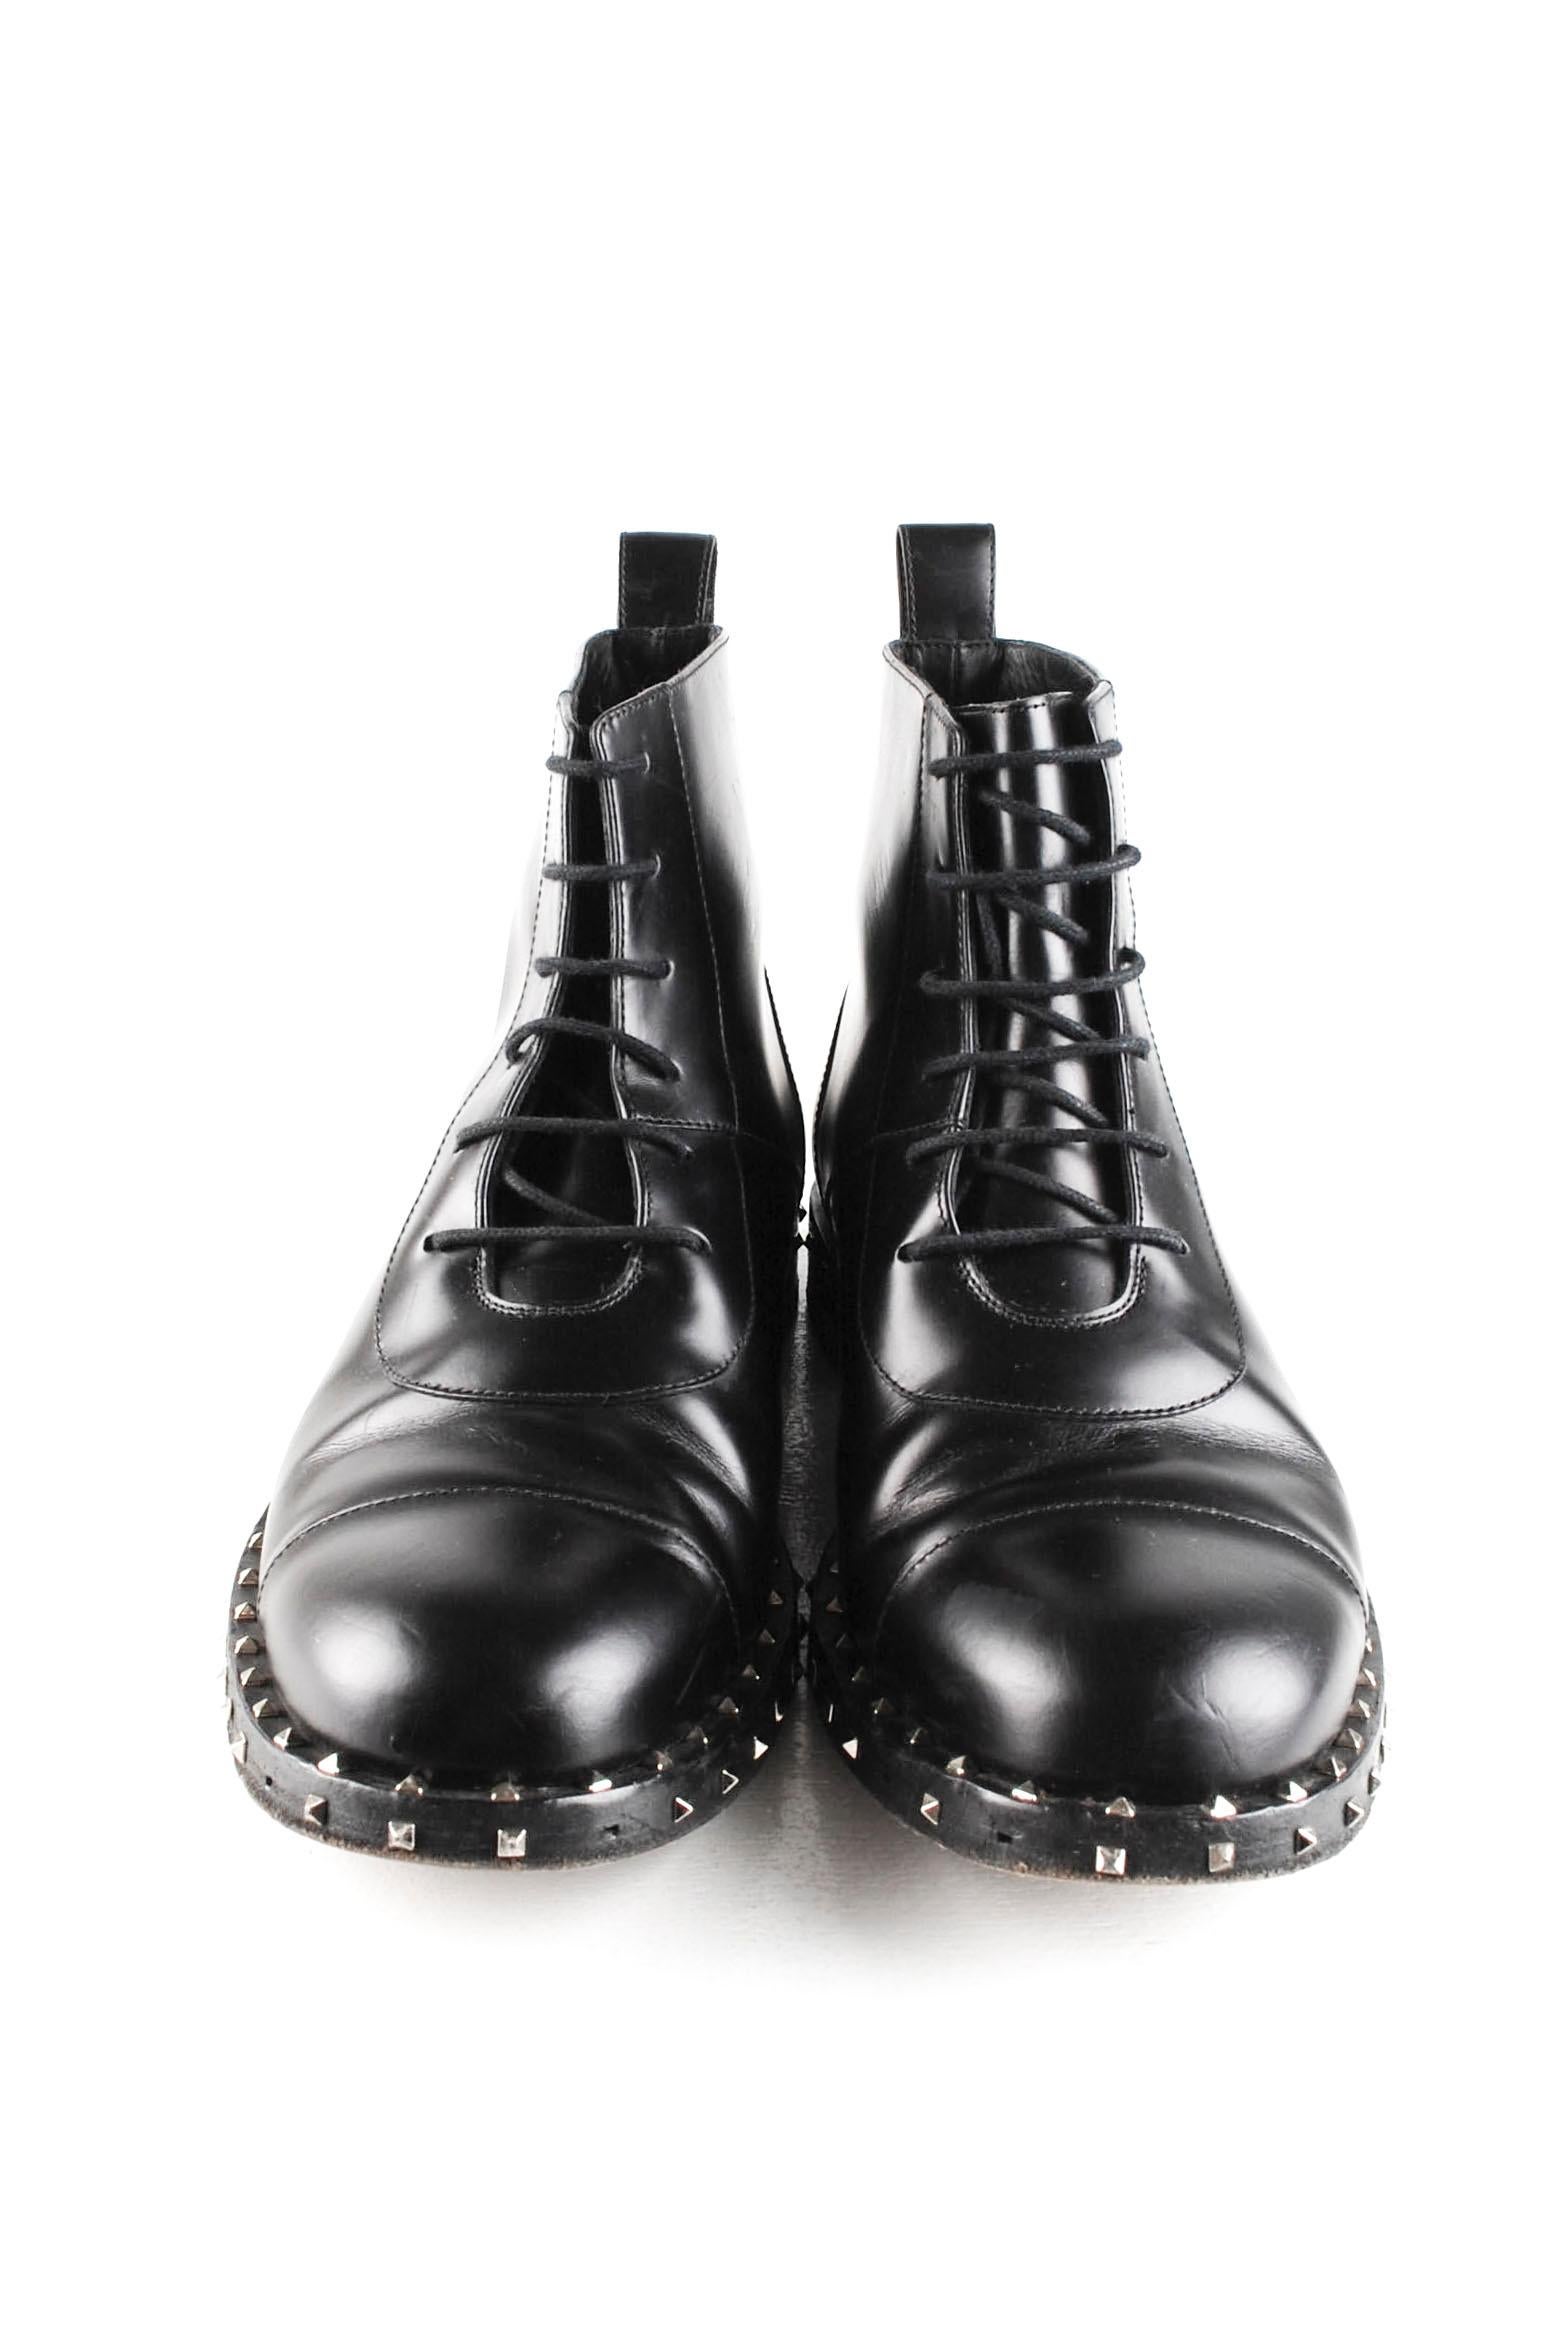 Item for sale is 100% genuine Valentino Garavani Boots Men Shoes 
Color: Black
(An actual color may a bit vary due to individual computer screen interpretation)
Material: Leather
Tag size: EUR 40
These shoes are great quality item. Rate 8.5 of